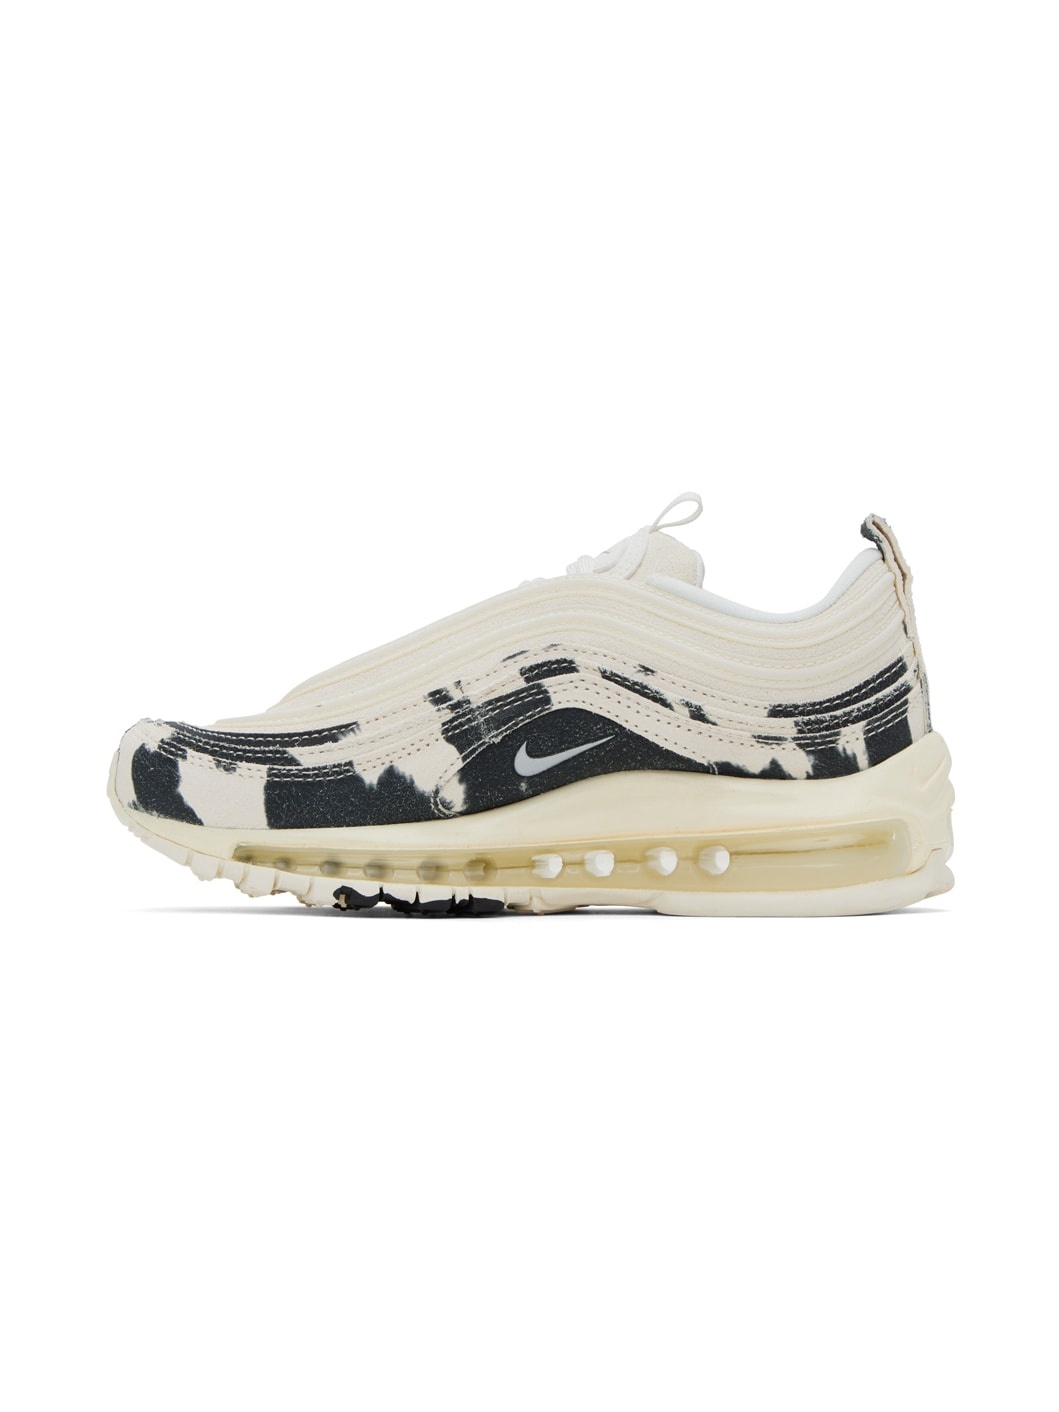 White Air Max 97 Sneakers - 3